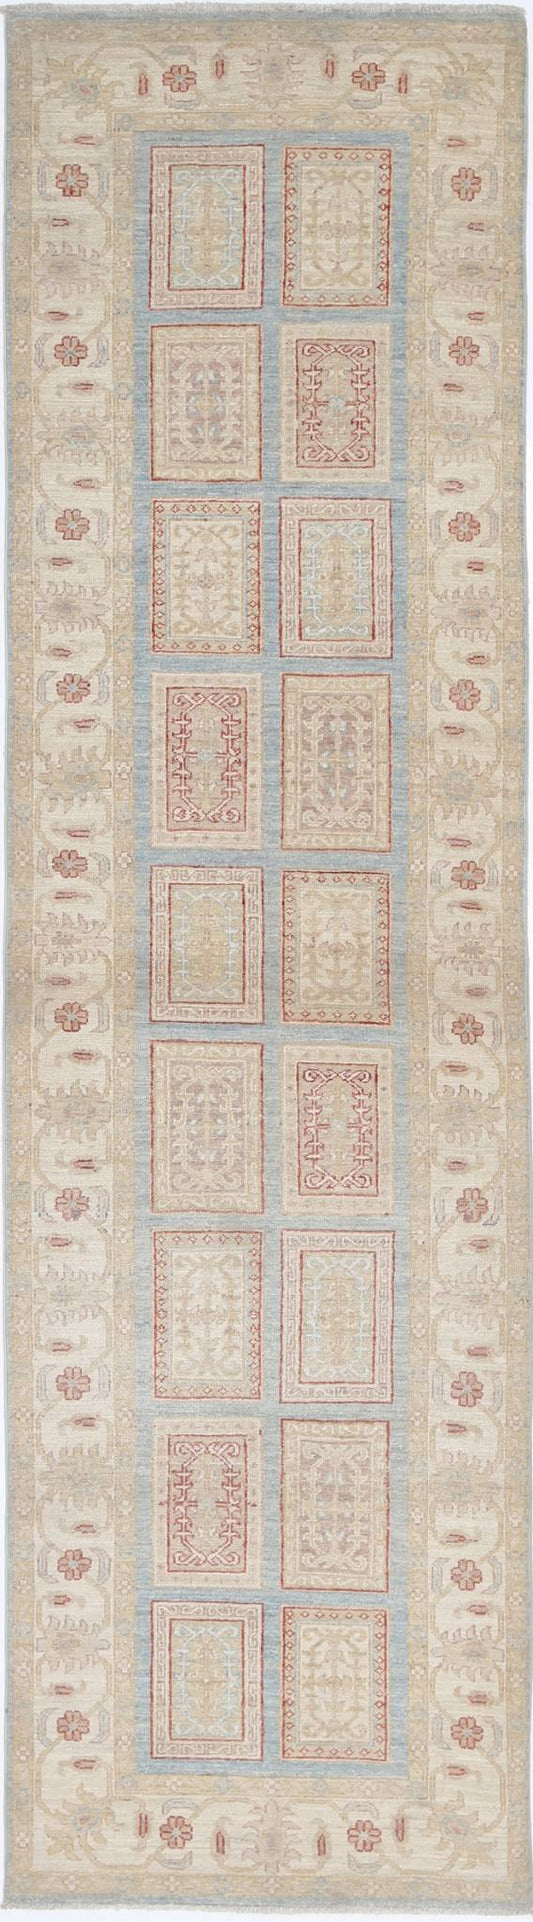 Traditional Hand Knotted Serenity Farhan Wool Rug of Size 2'8'' X 10'2'' in Blue and Ivory Colors - Made in Afghanistan